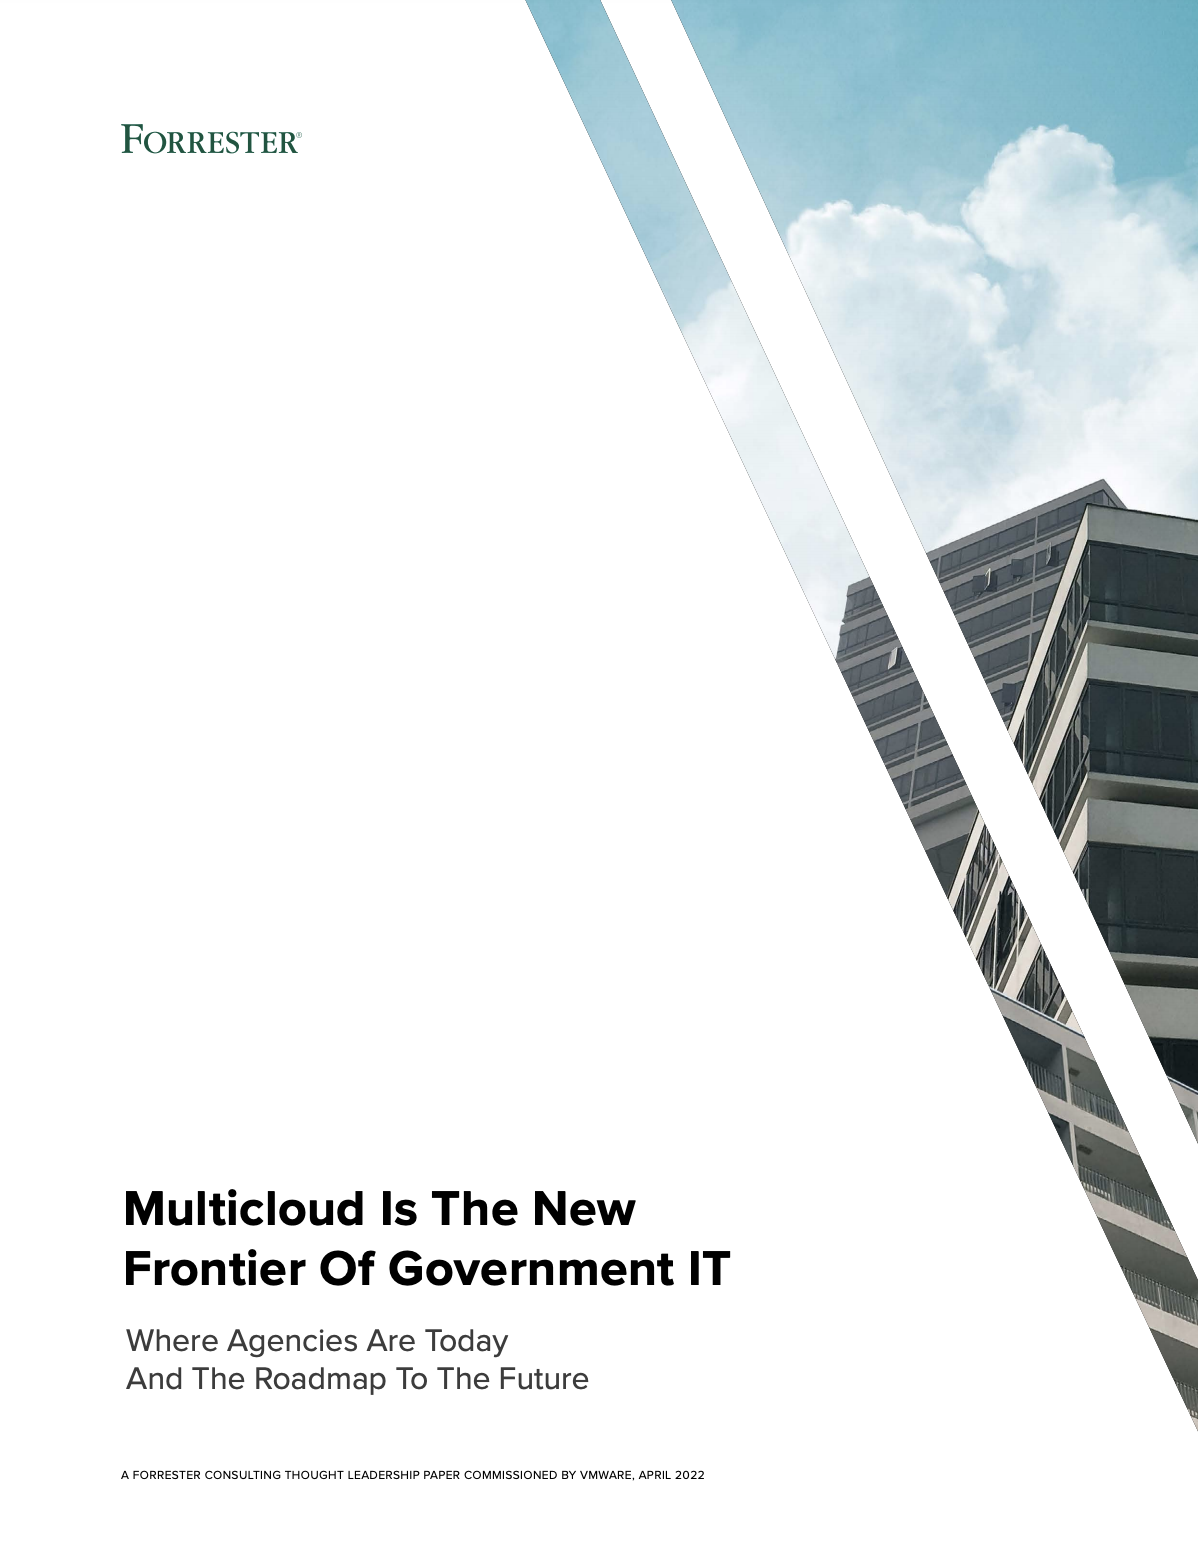 Multicloud Is The New Frontier Of Government IT